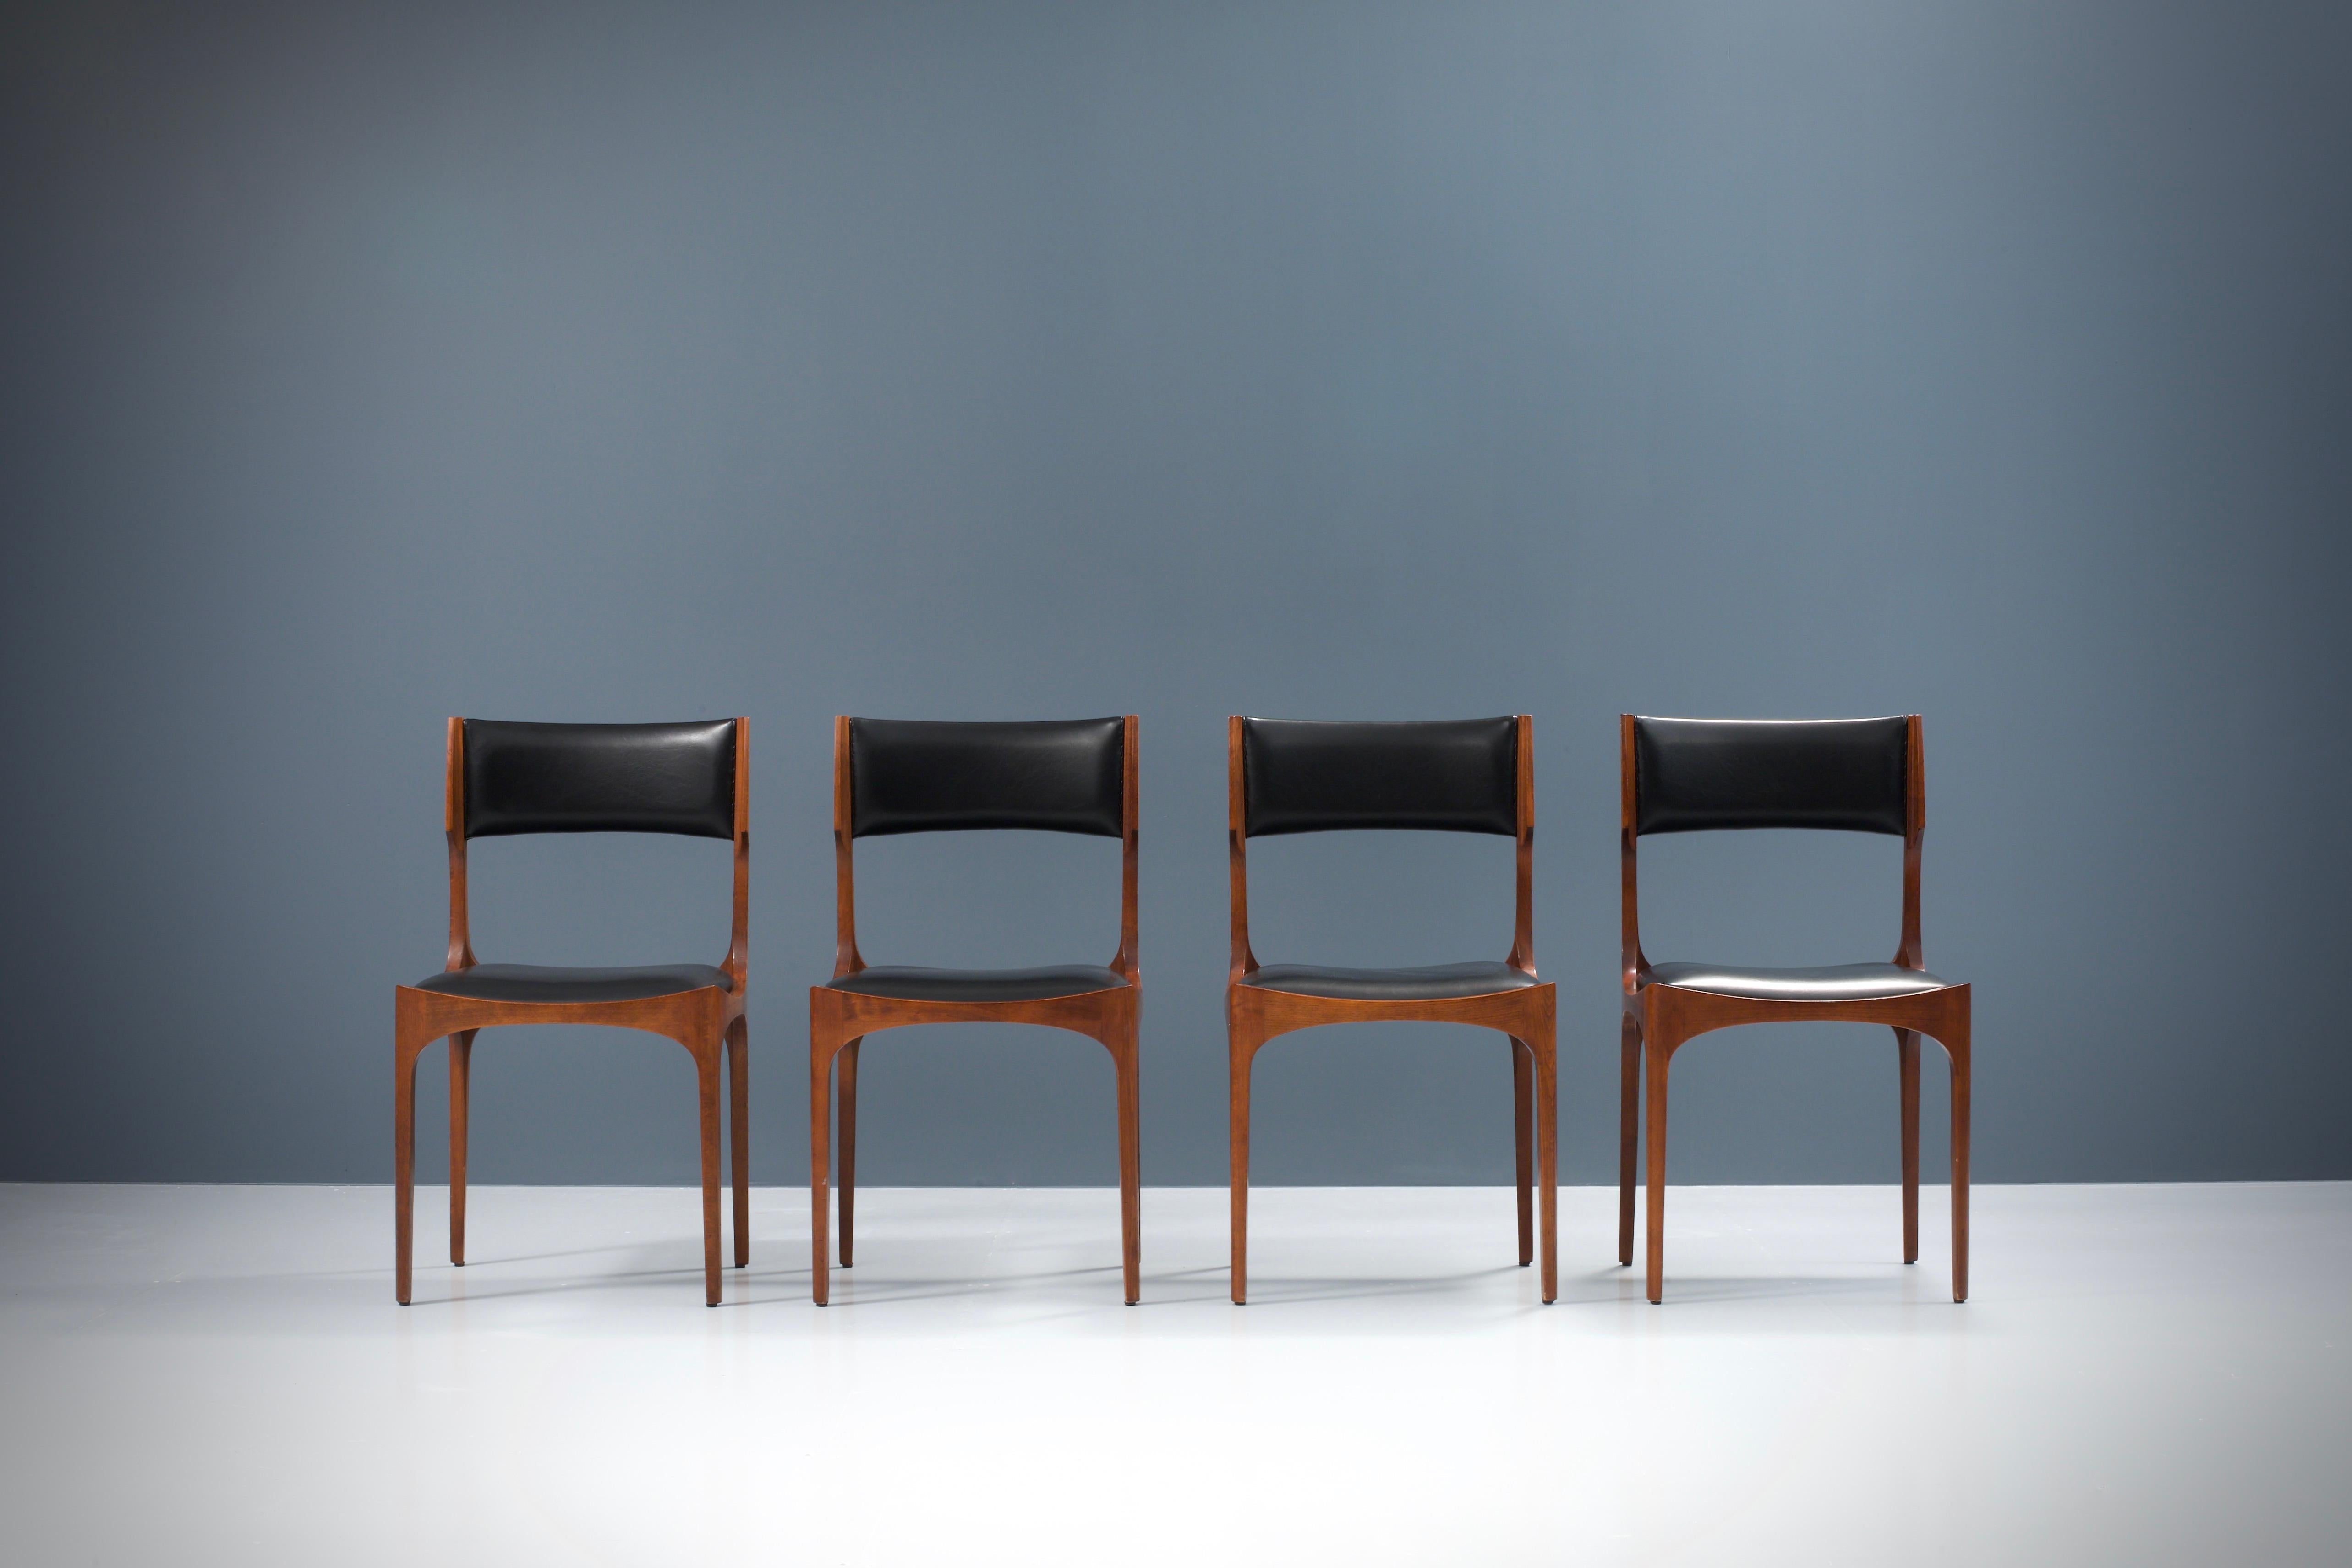 Very nicely patinated set of 4 Gibelli Chairs. The wood is really phenomenal as you can see on the pictures and contrasts very nicely with the black faux leather. Elegant chairs that are very sturdy and not wobbly at all because of the smart